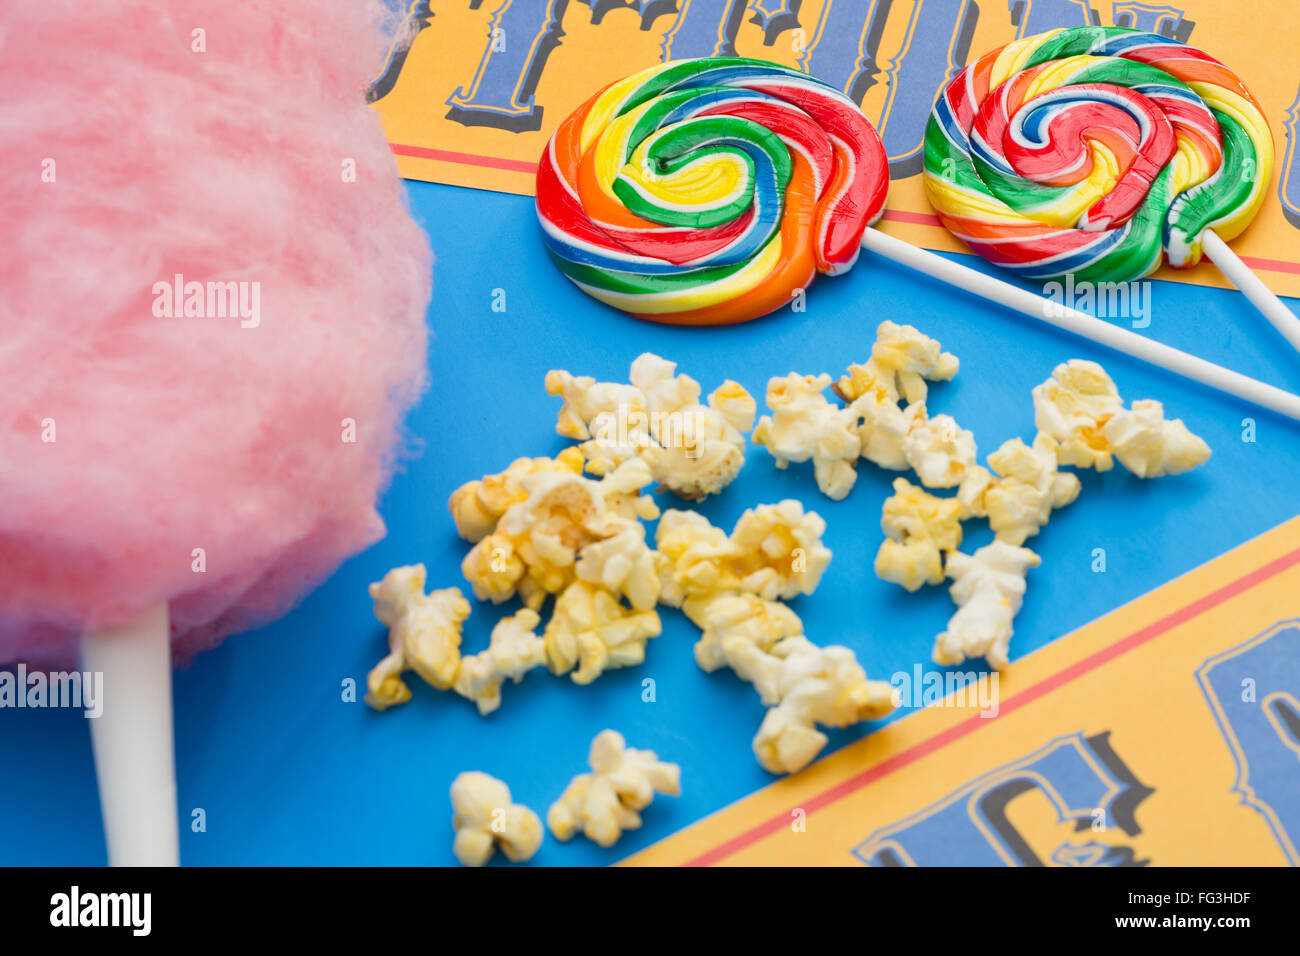 Lollipops, cotton candy and popcorn on table Stock Photo